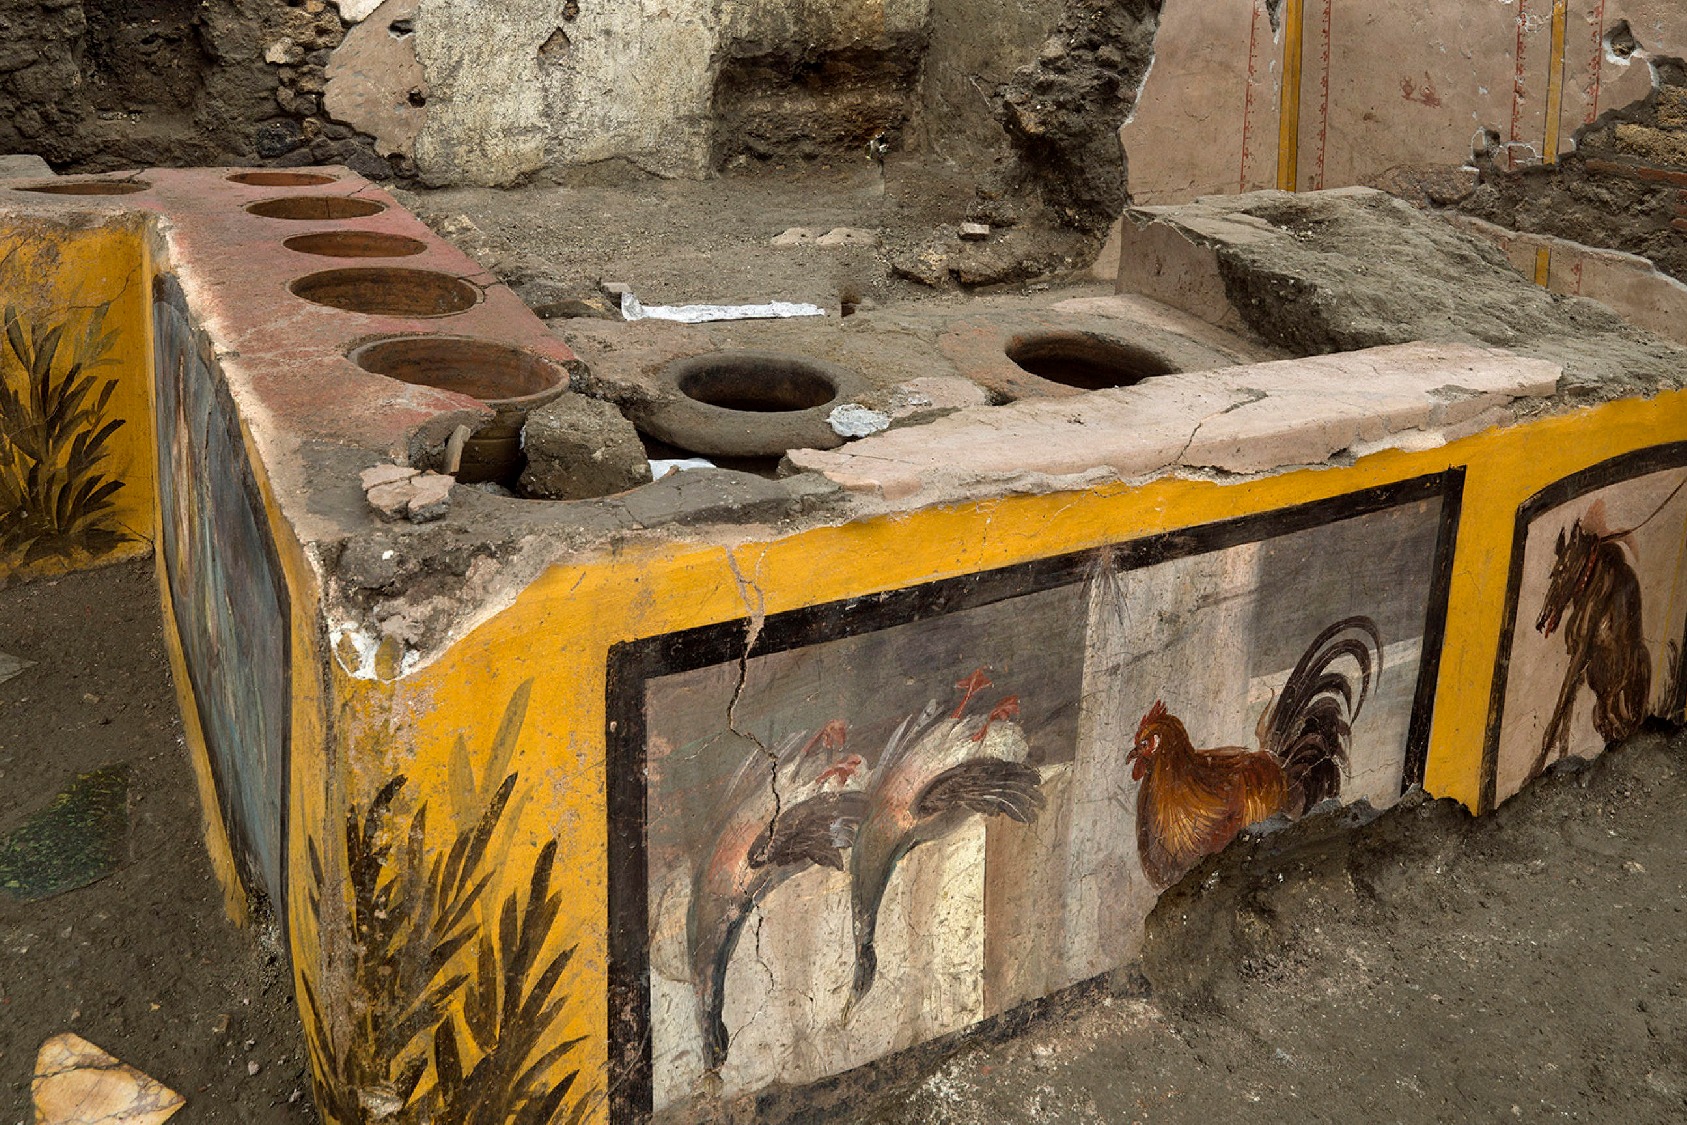 2000 Year Old Roman Era Equivalent Of Fast Food Stall Unearthed In Italy